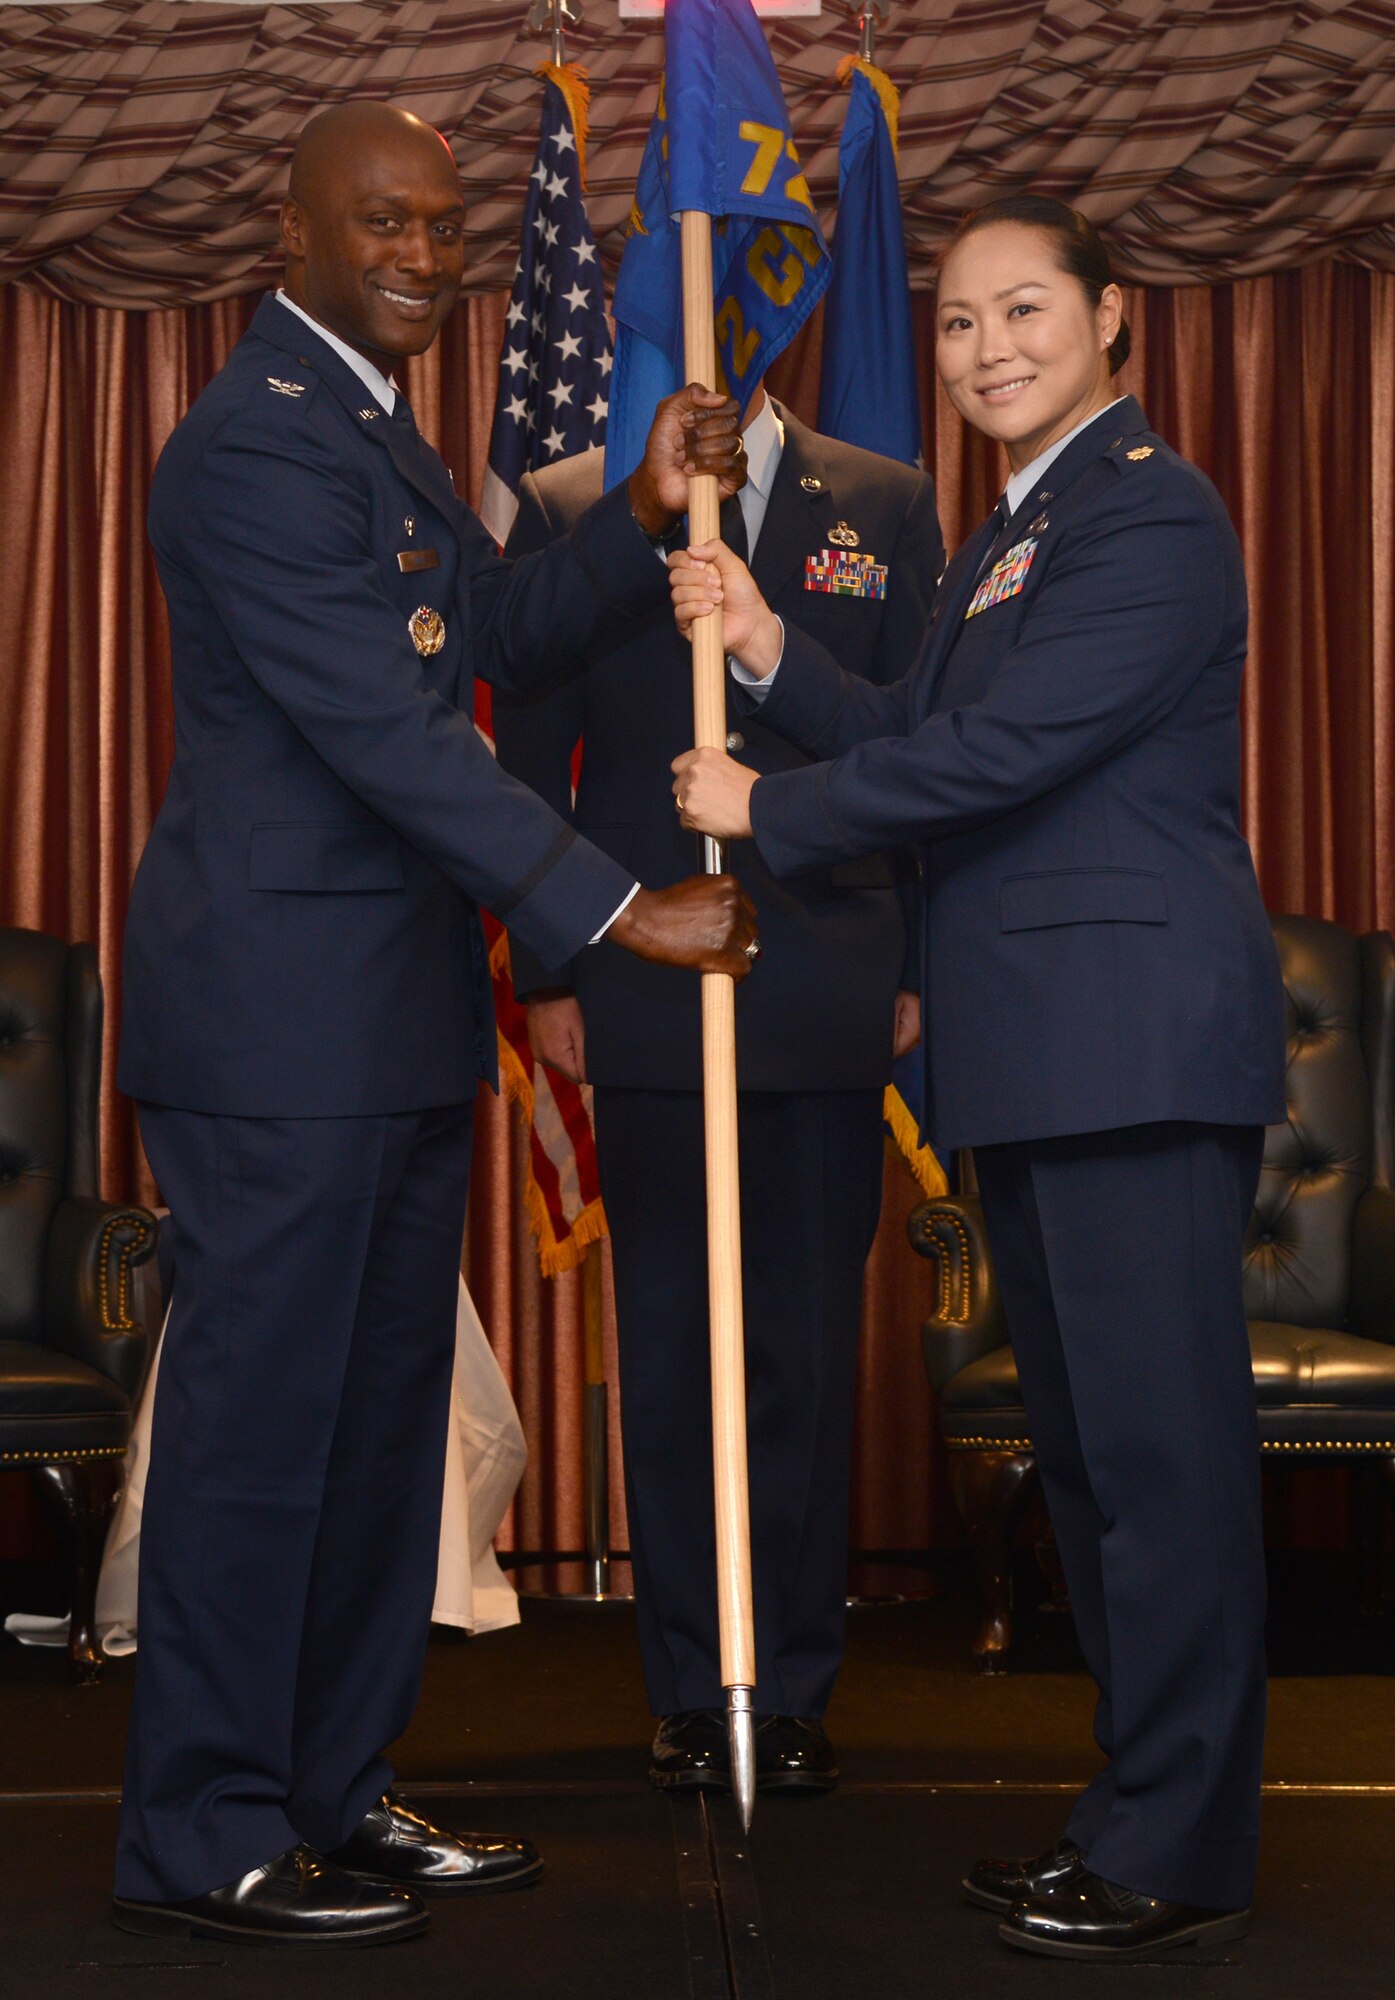 Col. Kenyon Bell, 72nd Air Base Wing commander, passes the guidon of the 72nd Comptroller Squadron to Maj. Yesun Yoon during a change of command ceremony July 12 at the Tinker Club. As the squadron commander, Major Yoon will be responsible for 194 Comptroller and Wing Staff Agency personnel. As chief financial officer of the 72nd Air Base Wing, she will plan and execute a $307 million operating budget and provide financial customer service to more than 65,000 military, civilians, retirees and Reserve personnel. The squadron certifies over $15 billion annually for the Oklahoma City Air Logistics Complex, 552nd Air Control Wing, Navy Strategic Communication WingONE, 507th Air Refueling Wing and 45 other associate units. (Air Force photo by Kelly White)